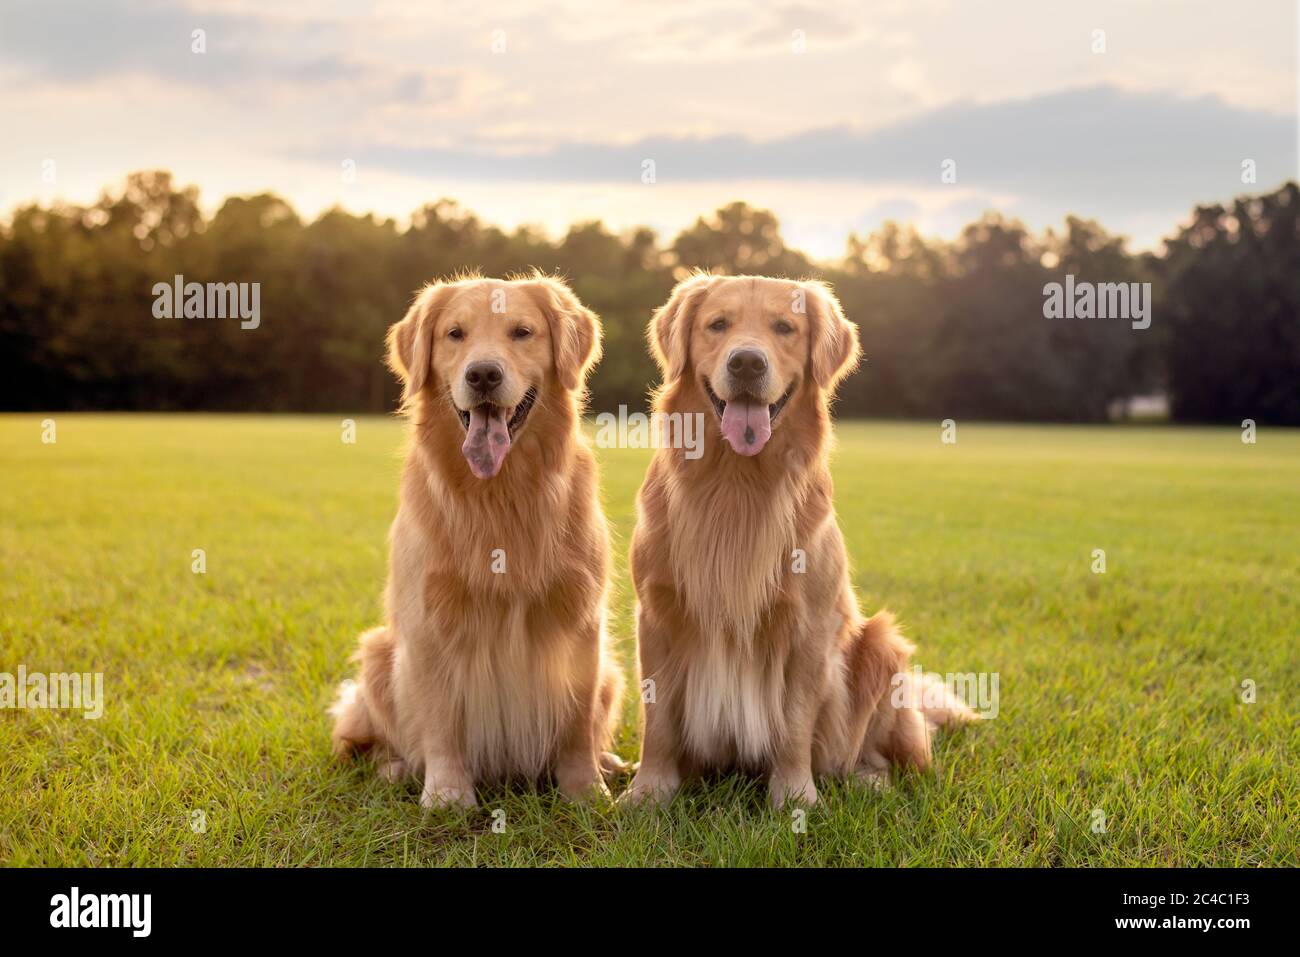 Pair of purebred golden retriever dogs outdoors on grassy meadow during golden hour at sunset Stock Photo